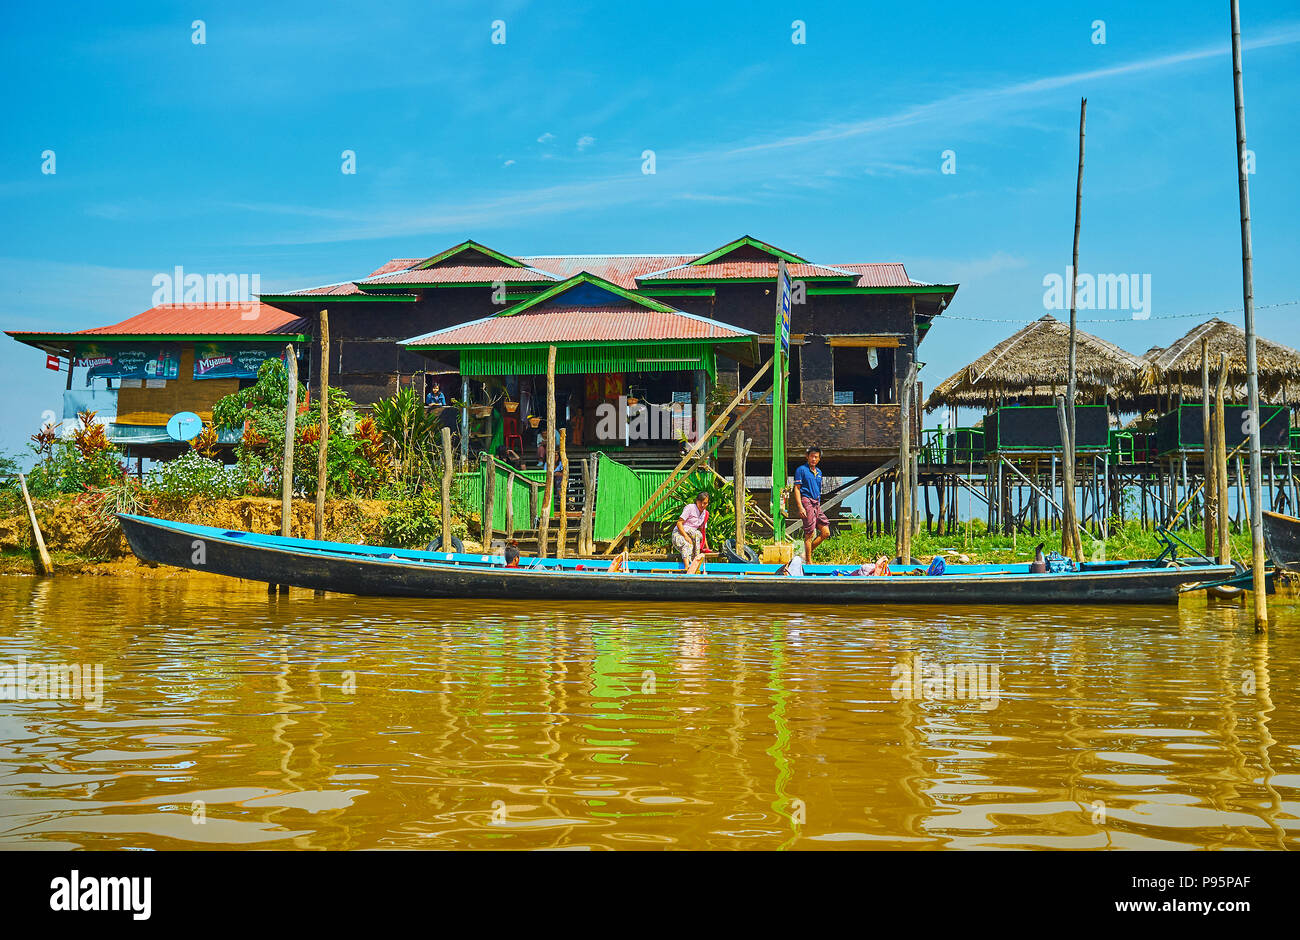 YWAMA, MYANMAR - FEBRUARY 18, 2018: The colorful wooden house on stilts with small pavilions serves as the tourist cafe on Inle Lake, on February 18 i Stock Photo